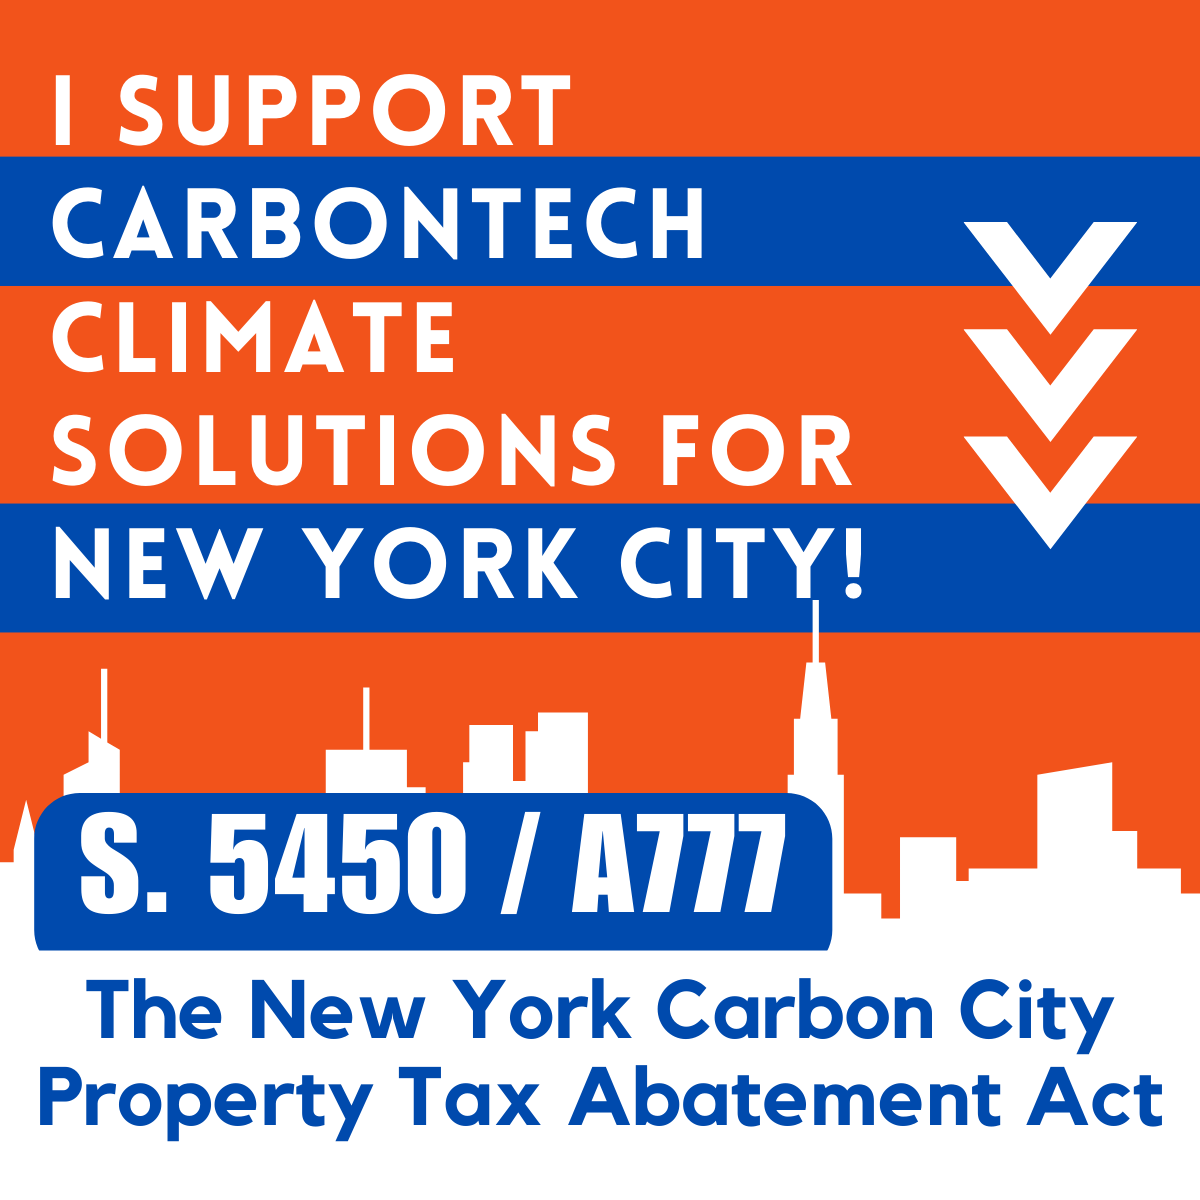 As a lifelong NYer (& registered voter), I know supporting building integrated carbontech is a win-win-win for NYC, the climate, & innovative startups leading the way to advance climate solutions @bradhoylman @CarlHeastie @AndreaSCousins @LizKrueger @LindaBRosenthal #NYCarbonCity